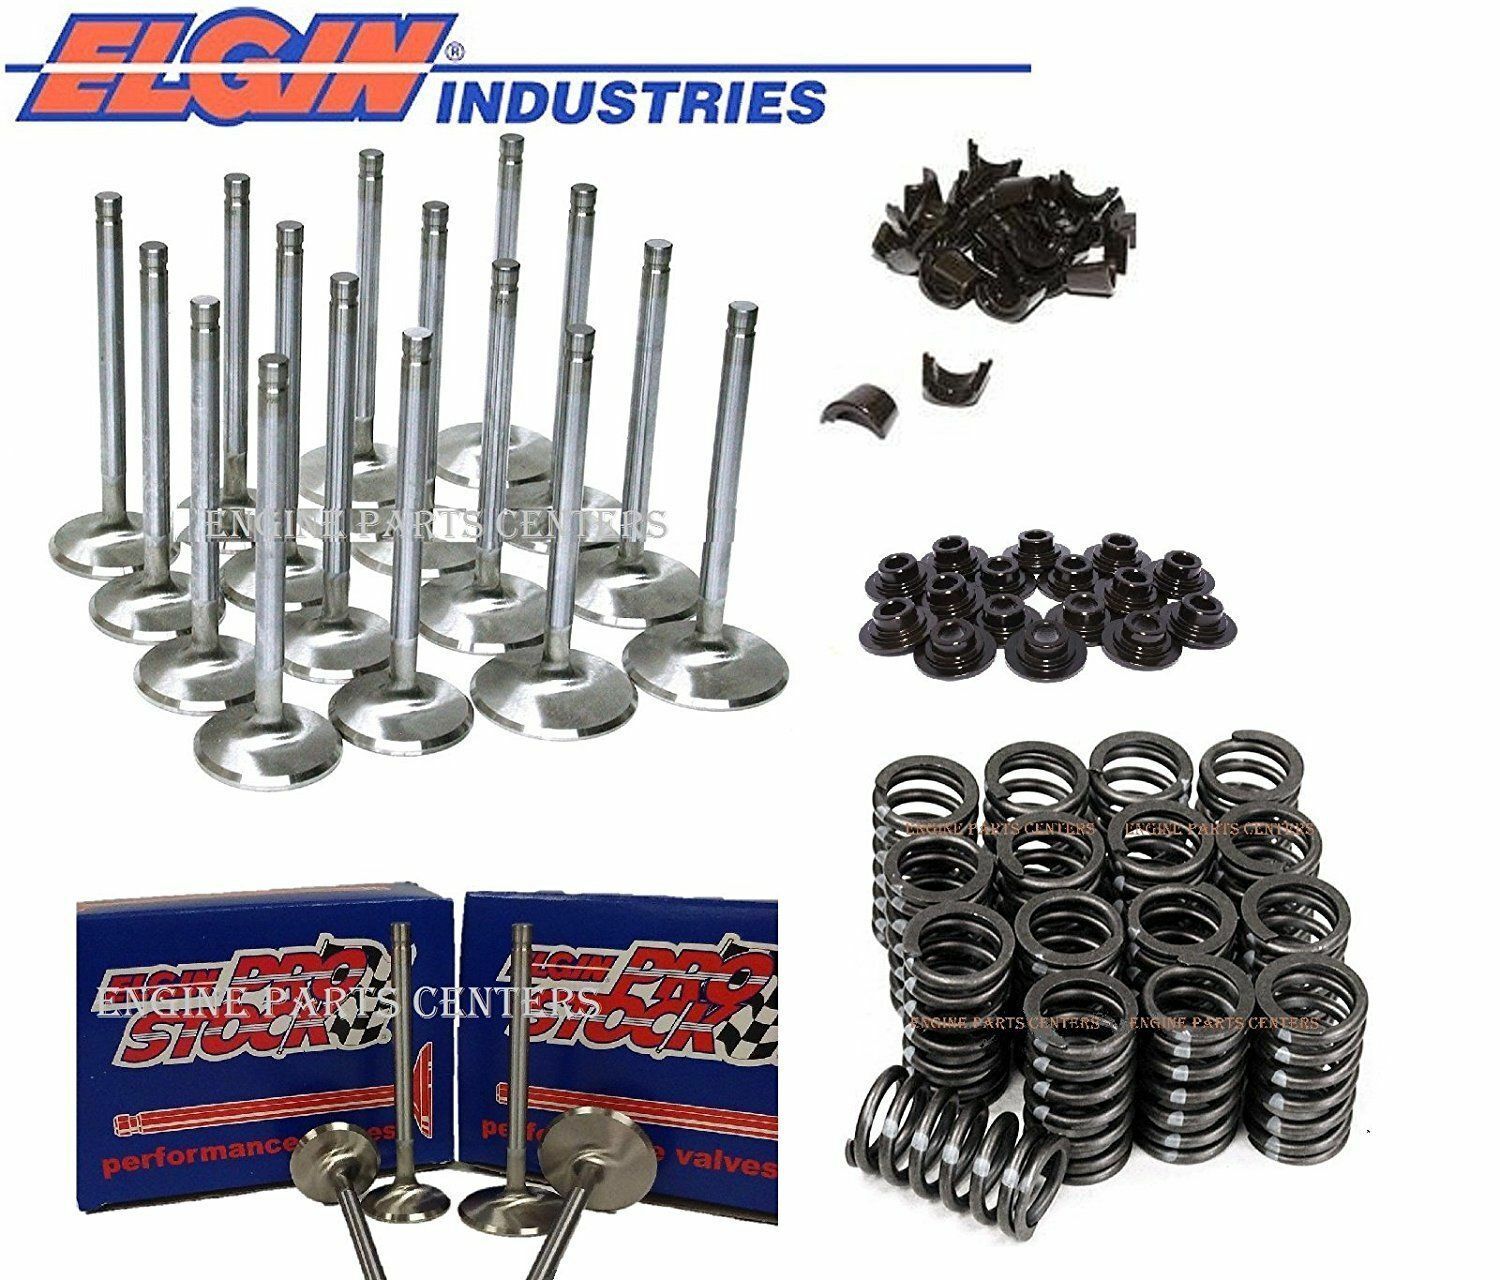 Head Dia Stainless Steel Valves 1.94 Int compatible with Chevy 283 327 350 400 Springs Retainers & Locks ELGIN PERFORMANCE & 1.50 Exh Head Dia 